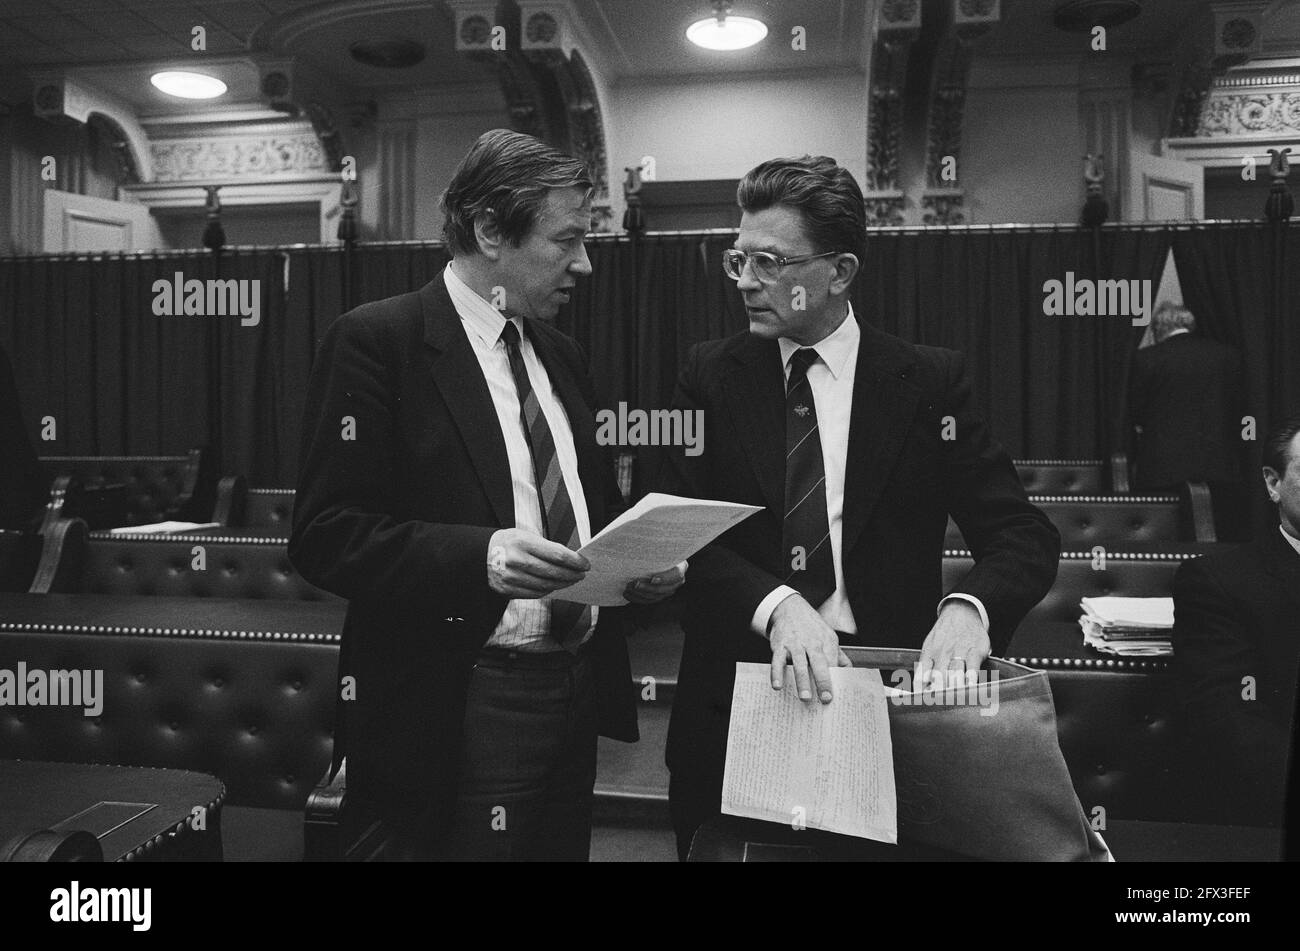 Minister Van Aardenne makes statement in Lower House following report RSV survey Van Dam (l) and Van Dijk, no. 5a and 6a Joekes (l) and Van Dam, December 18, 1984, REPORTS, politics, statements, The Netherlands, 20th century press agency photo, news to remember, documentary, historic photography 1945-1990, visual stories, human history of the Twentieth Century, capturing moments in time Stock Photo